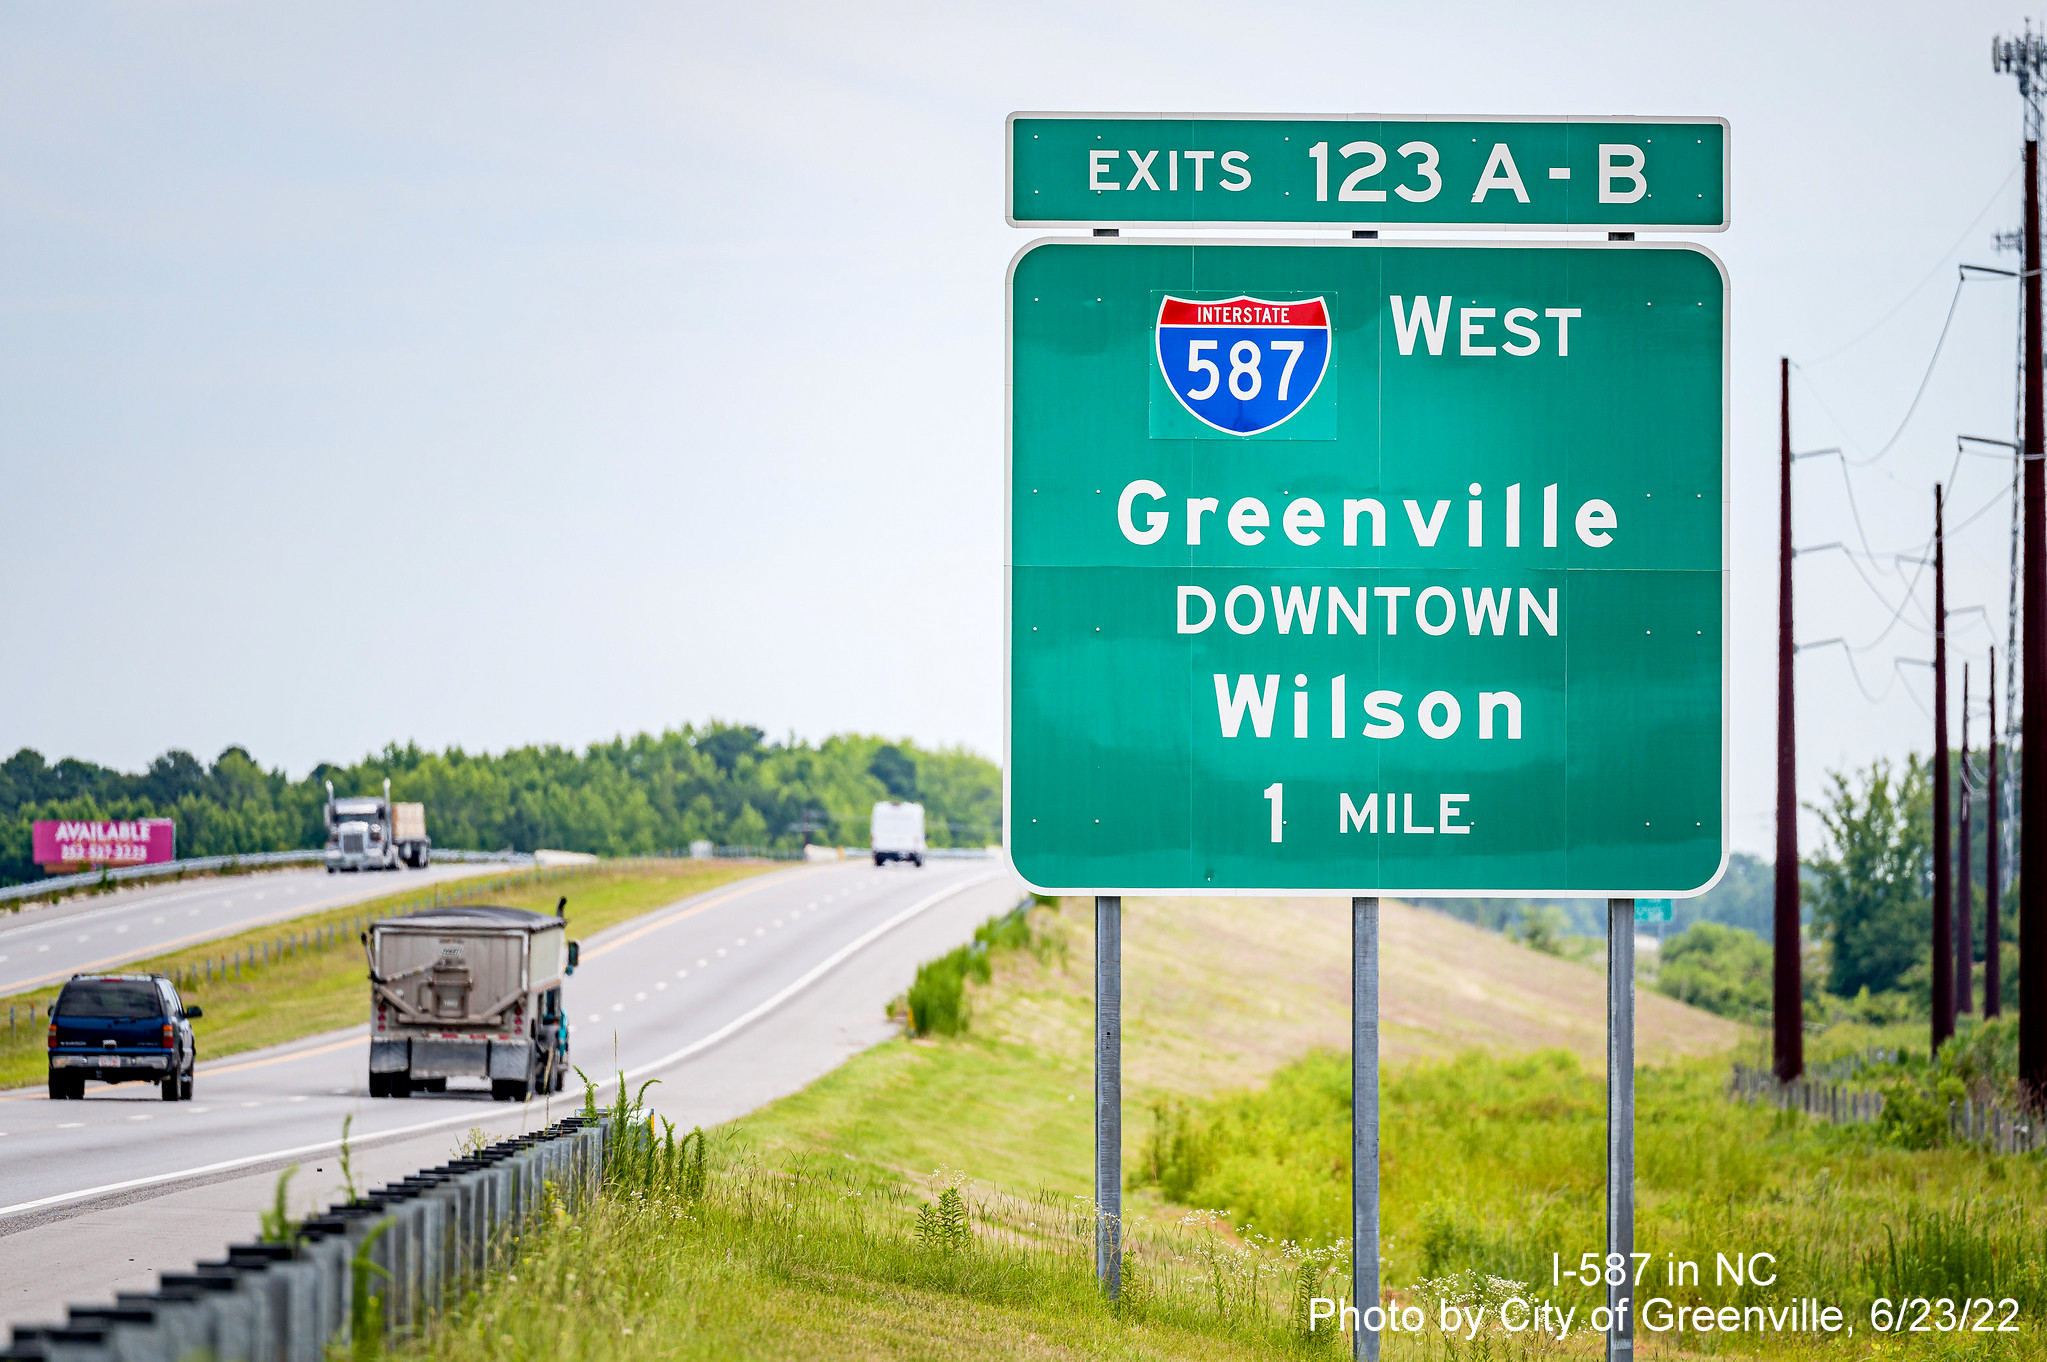 Image of new I-587 shield on 1 mile advance former US 264 exit sign on NC 11 North Bypass in Greenville, by City of Greenville June 2022